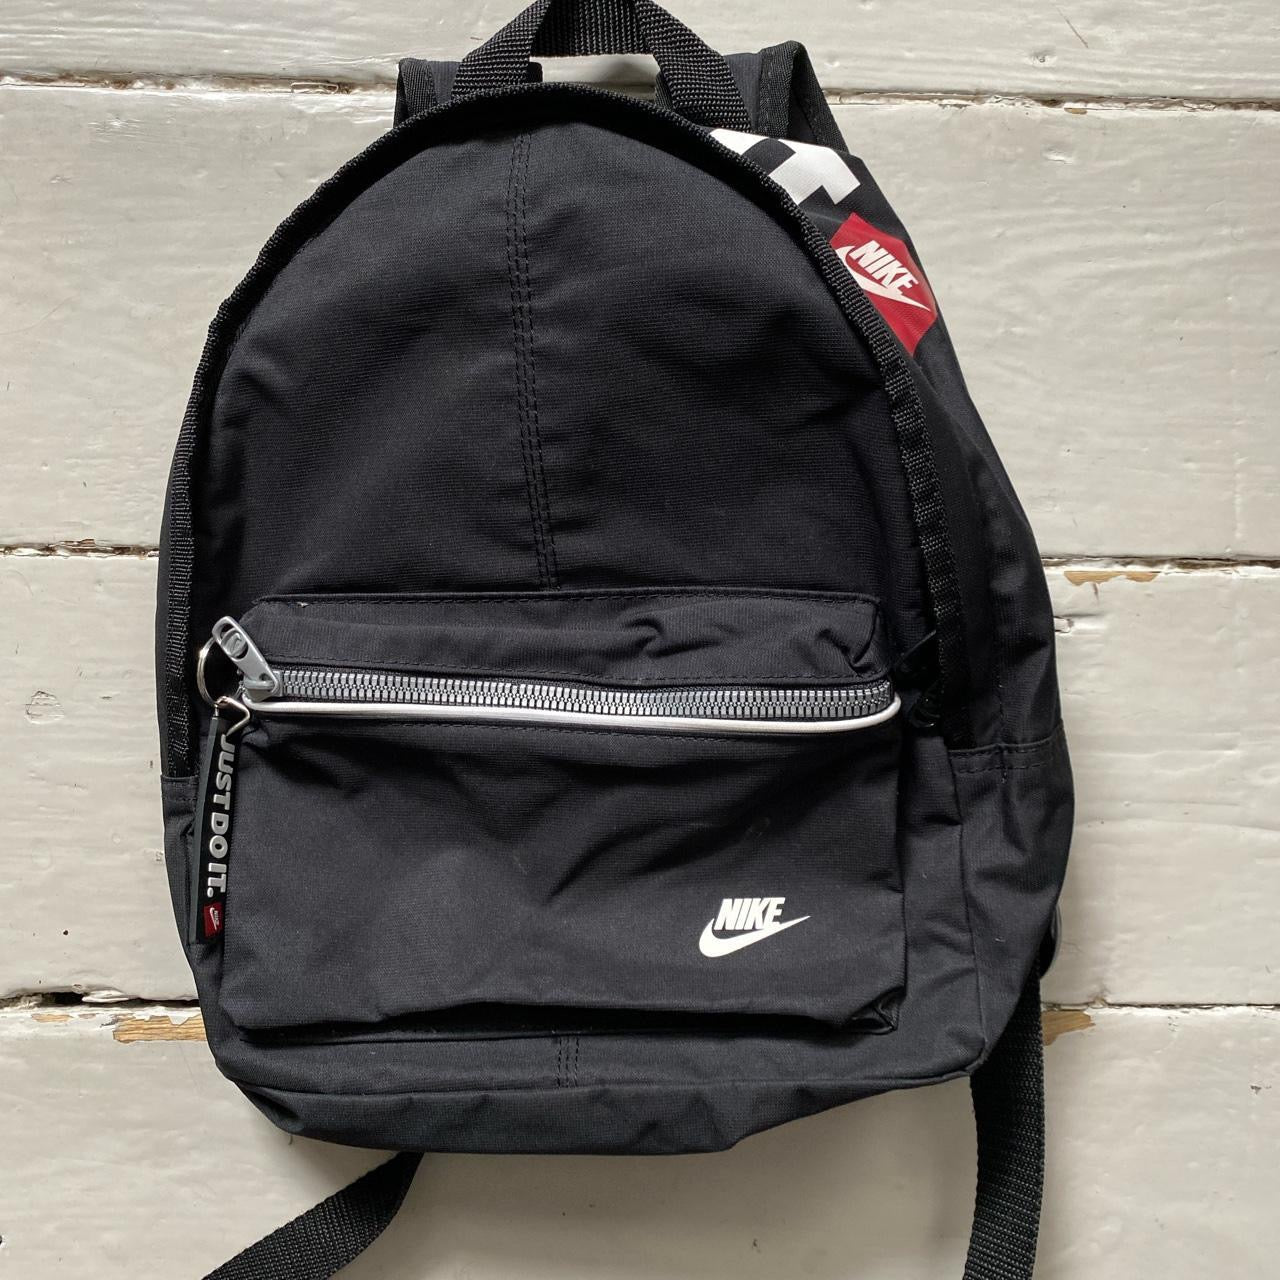 Nike Just Do It Bag